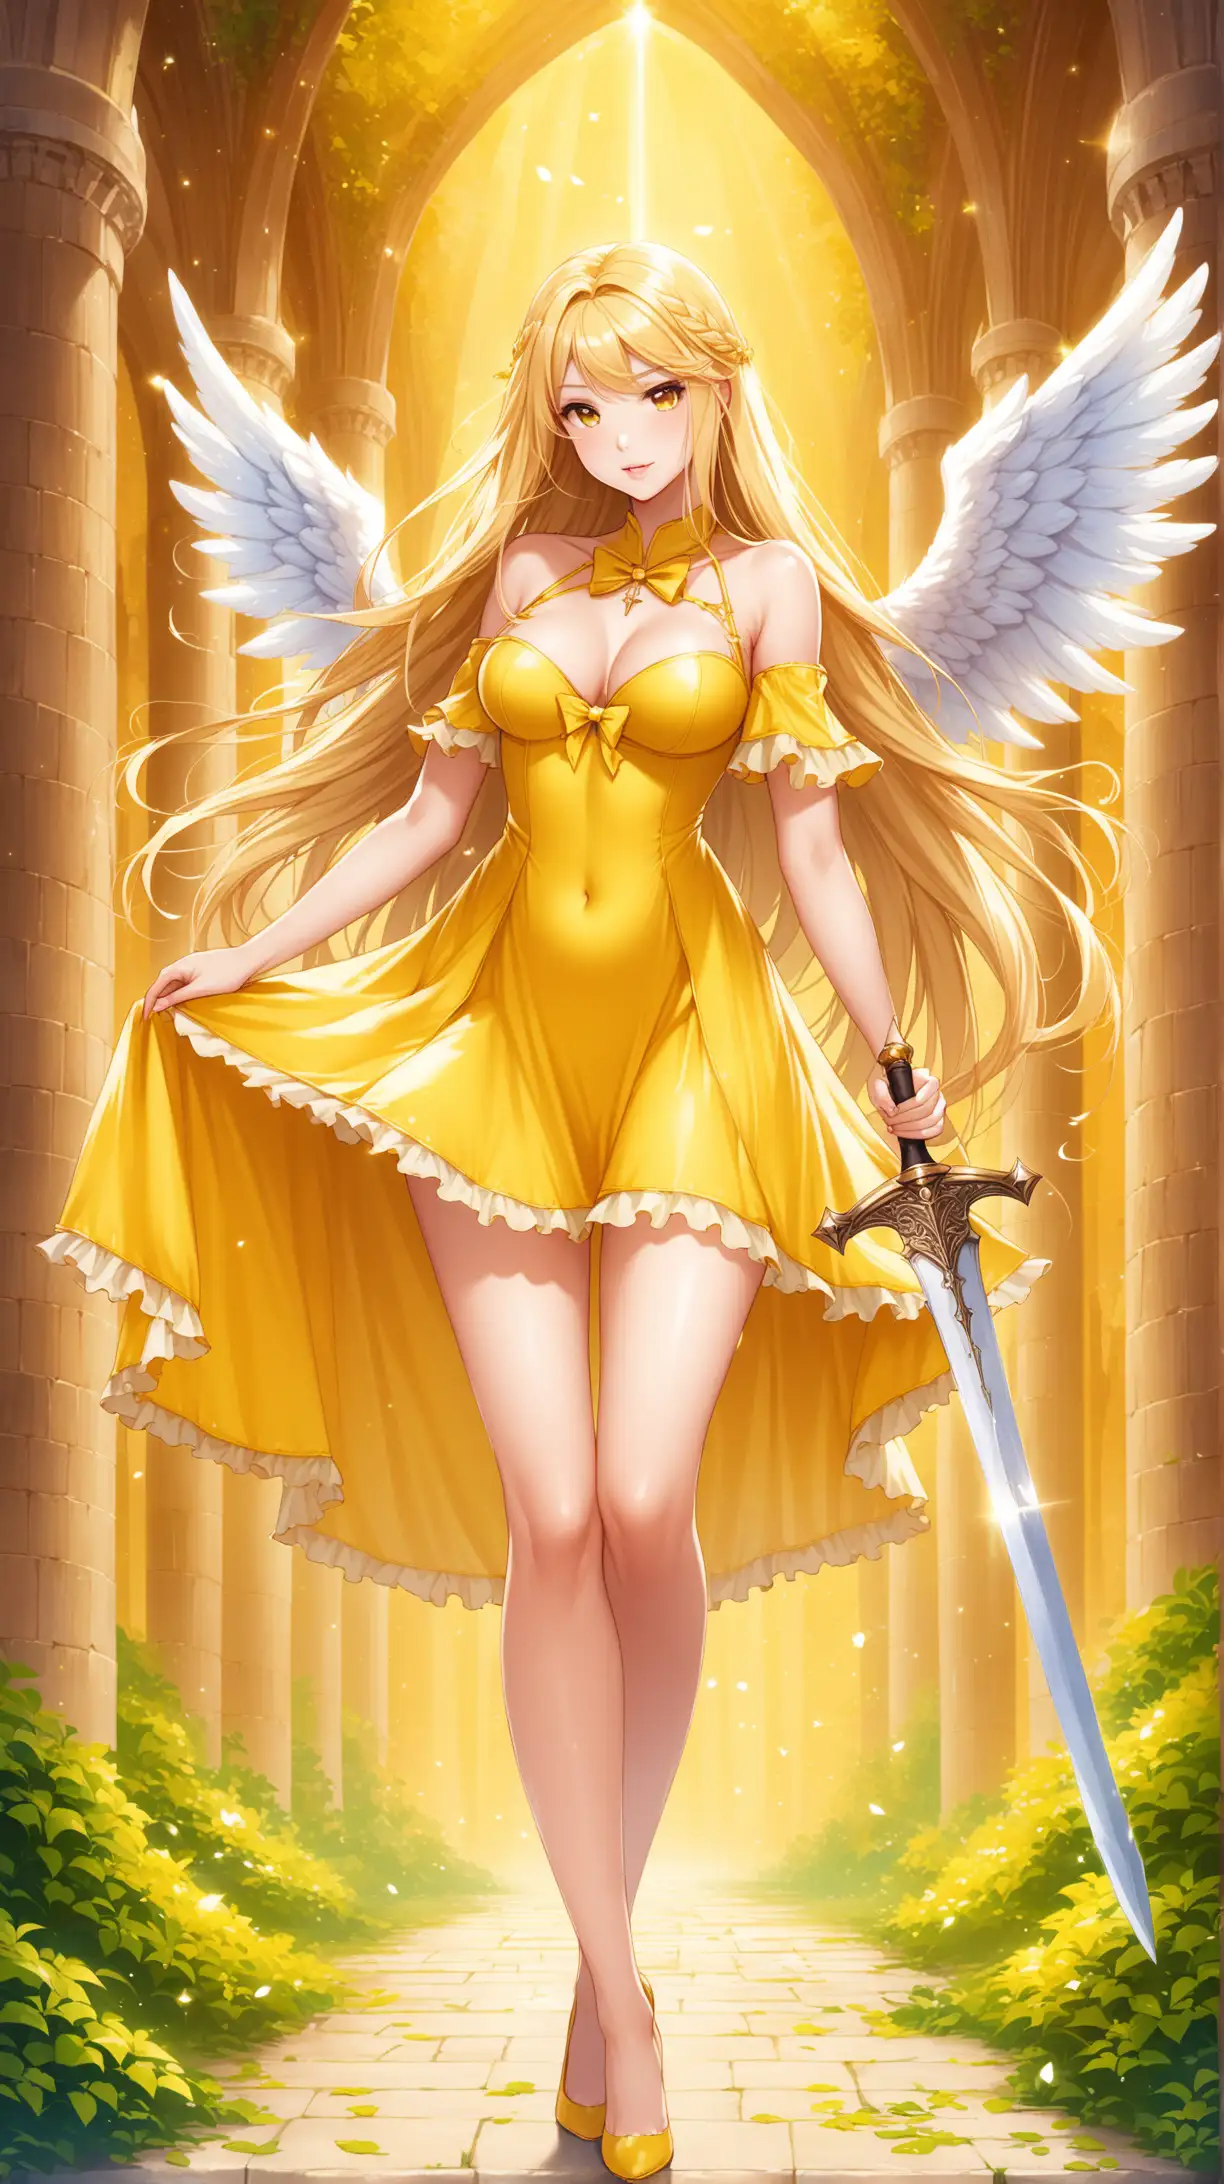 Sexy women carry sword , angel costume, playful, blond long hair, yellow short sexy dress, fantastic background .